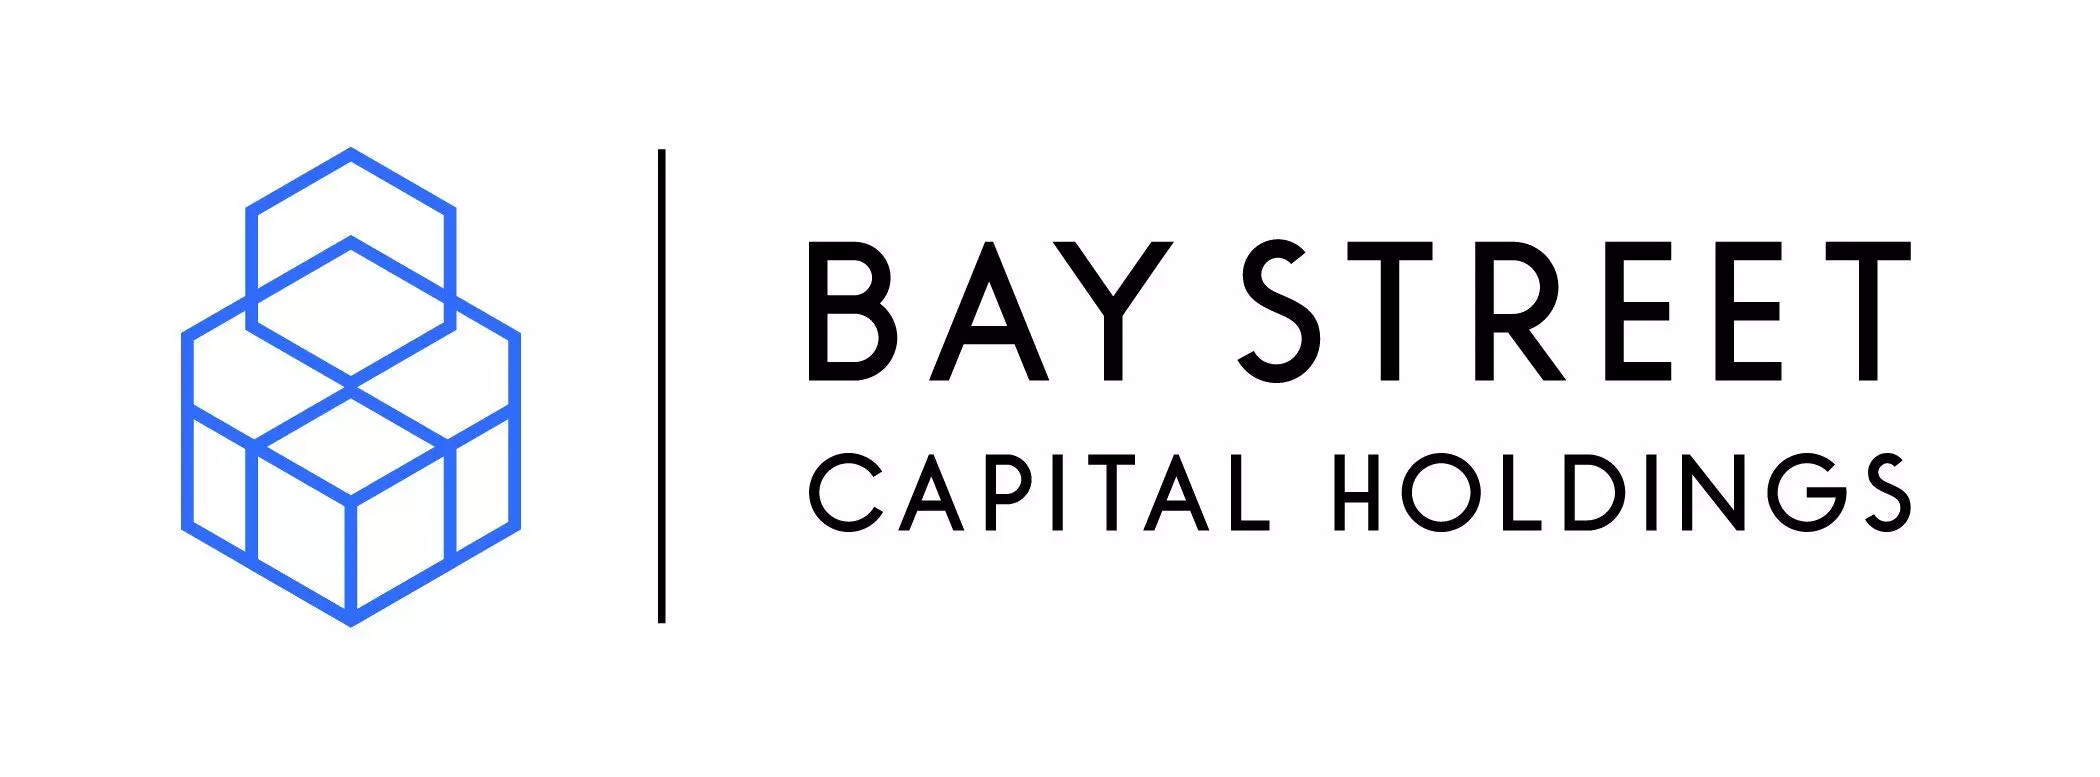 Bay Street Capital Holdings - Real Estate and Investment Firm